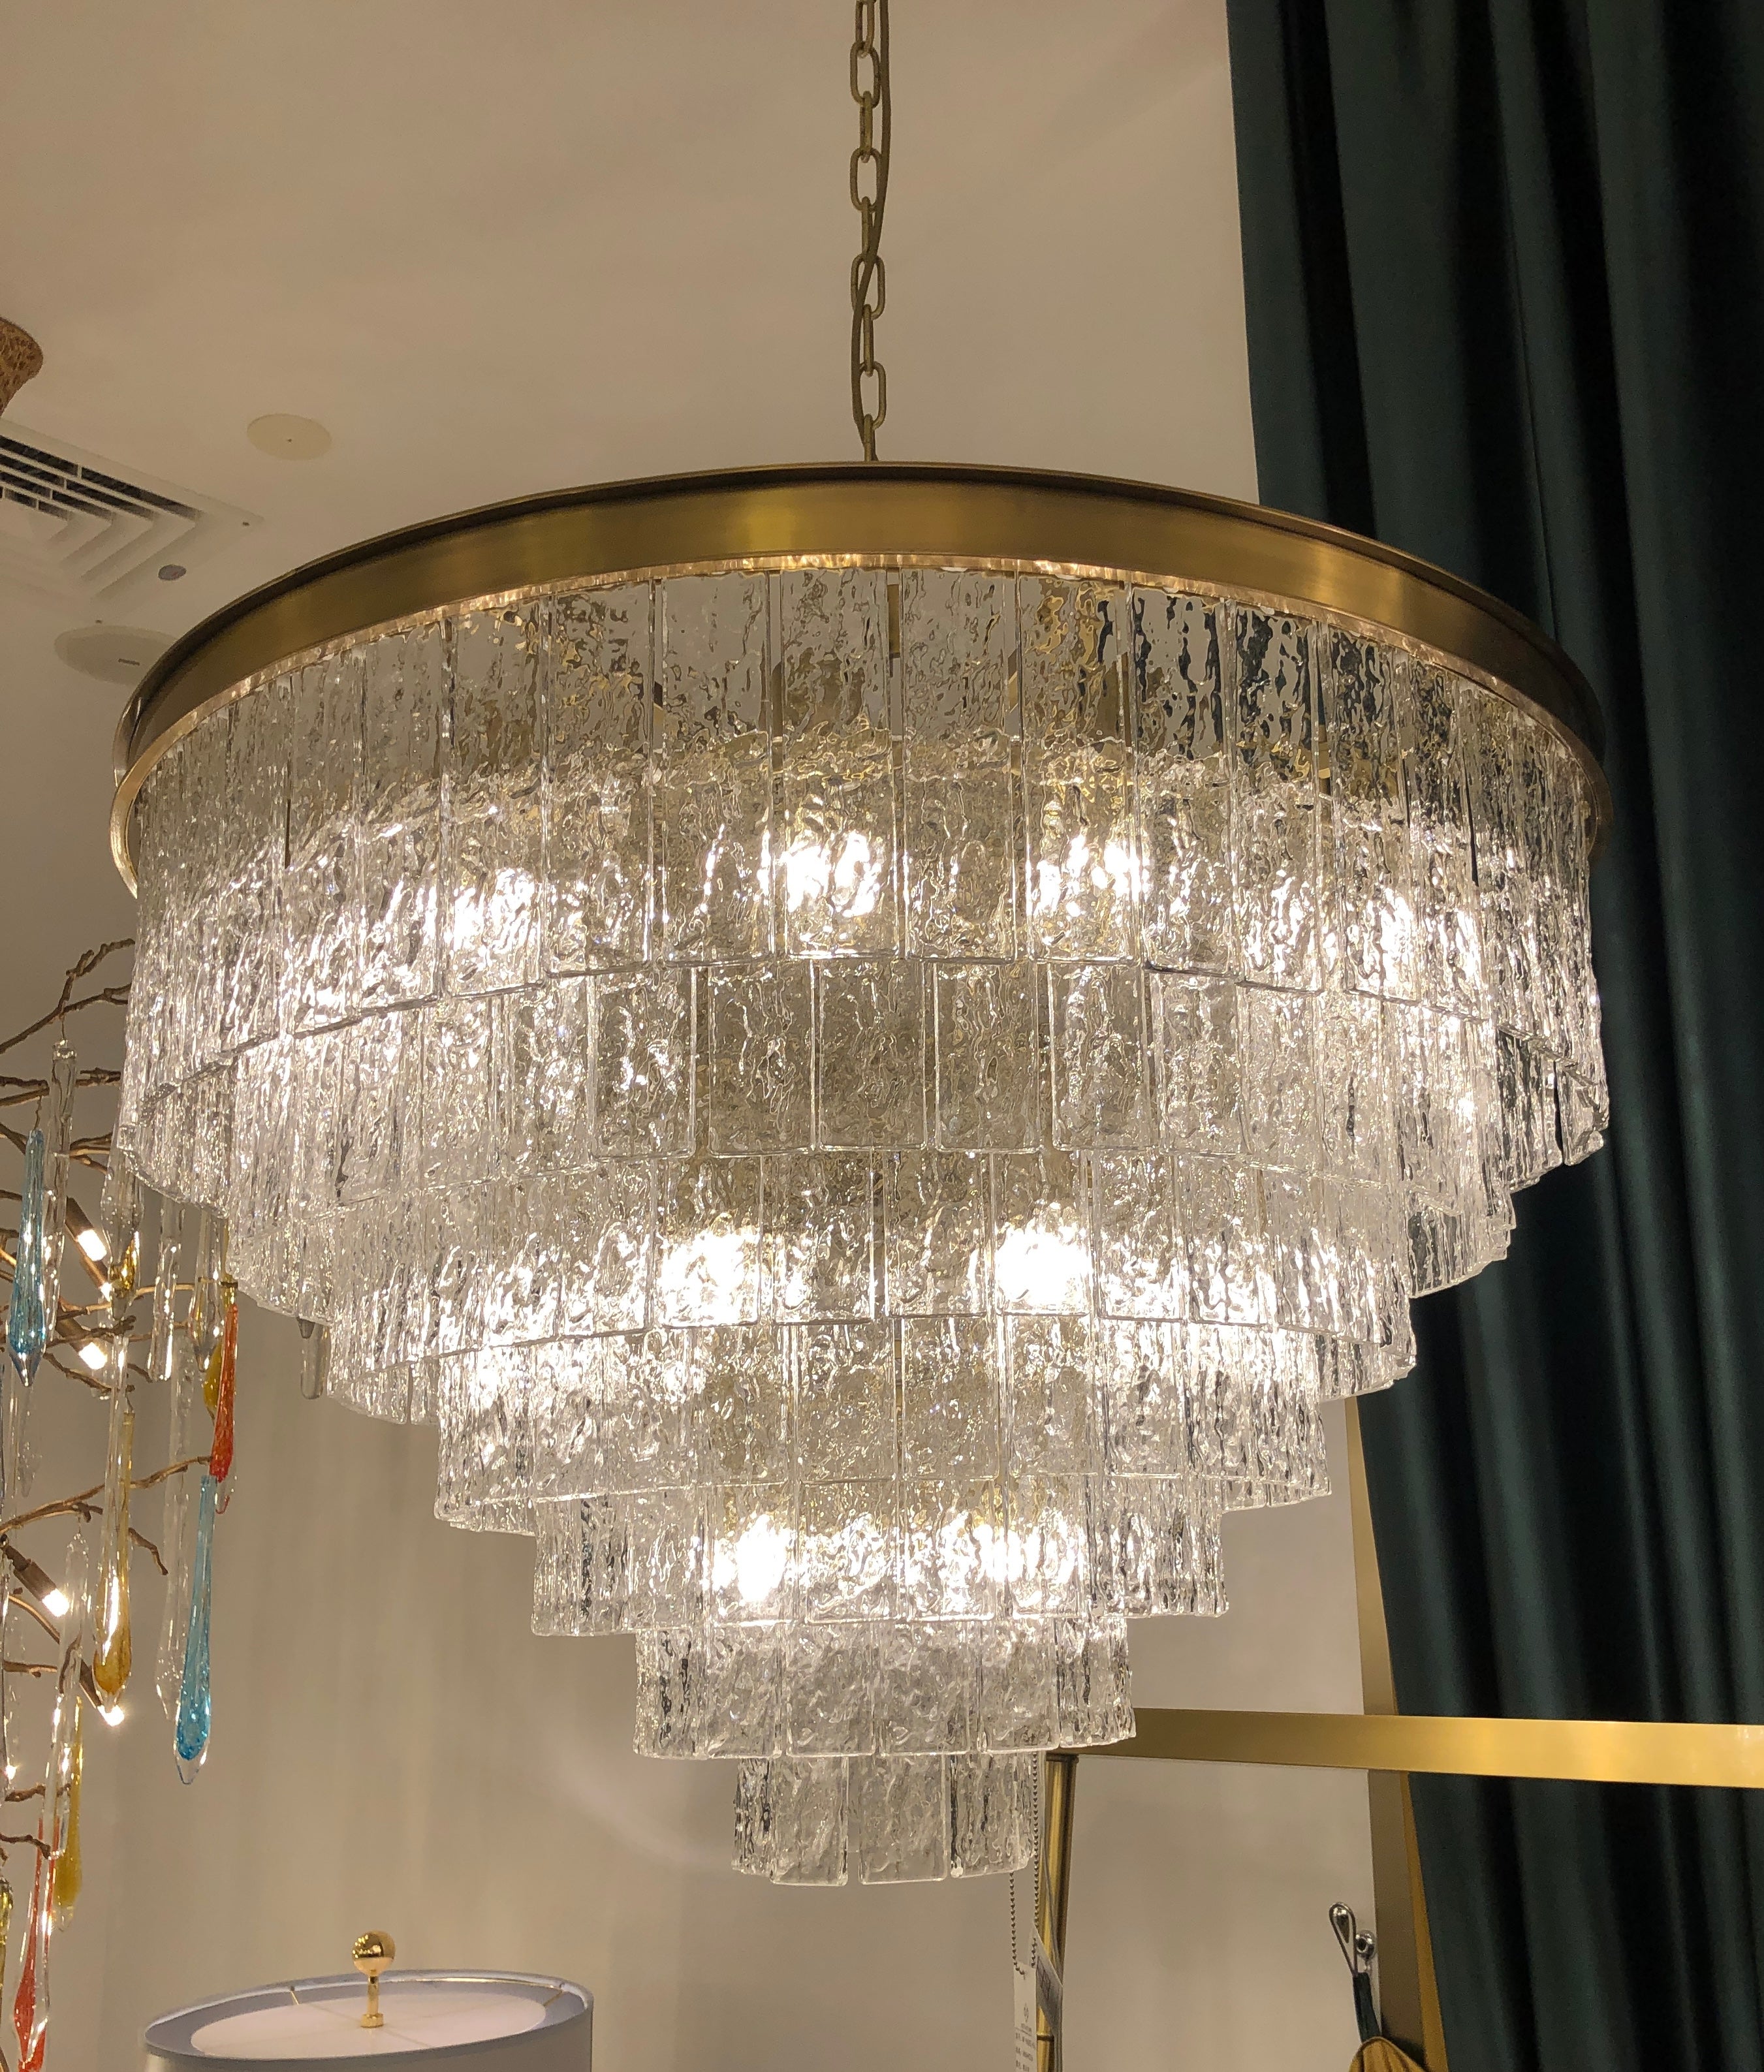 Oliver Round Tiered Glass Tile Chandelier Collection - Italian Concept